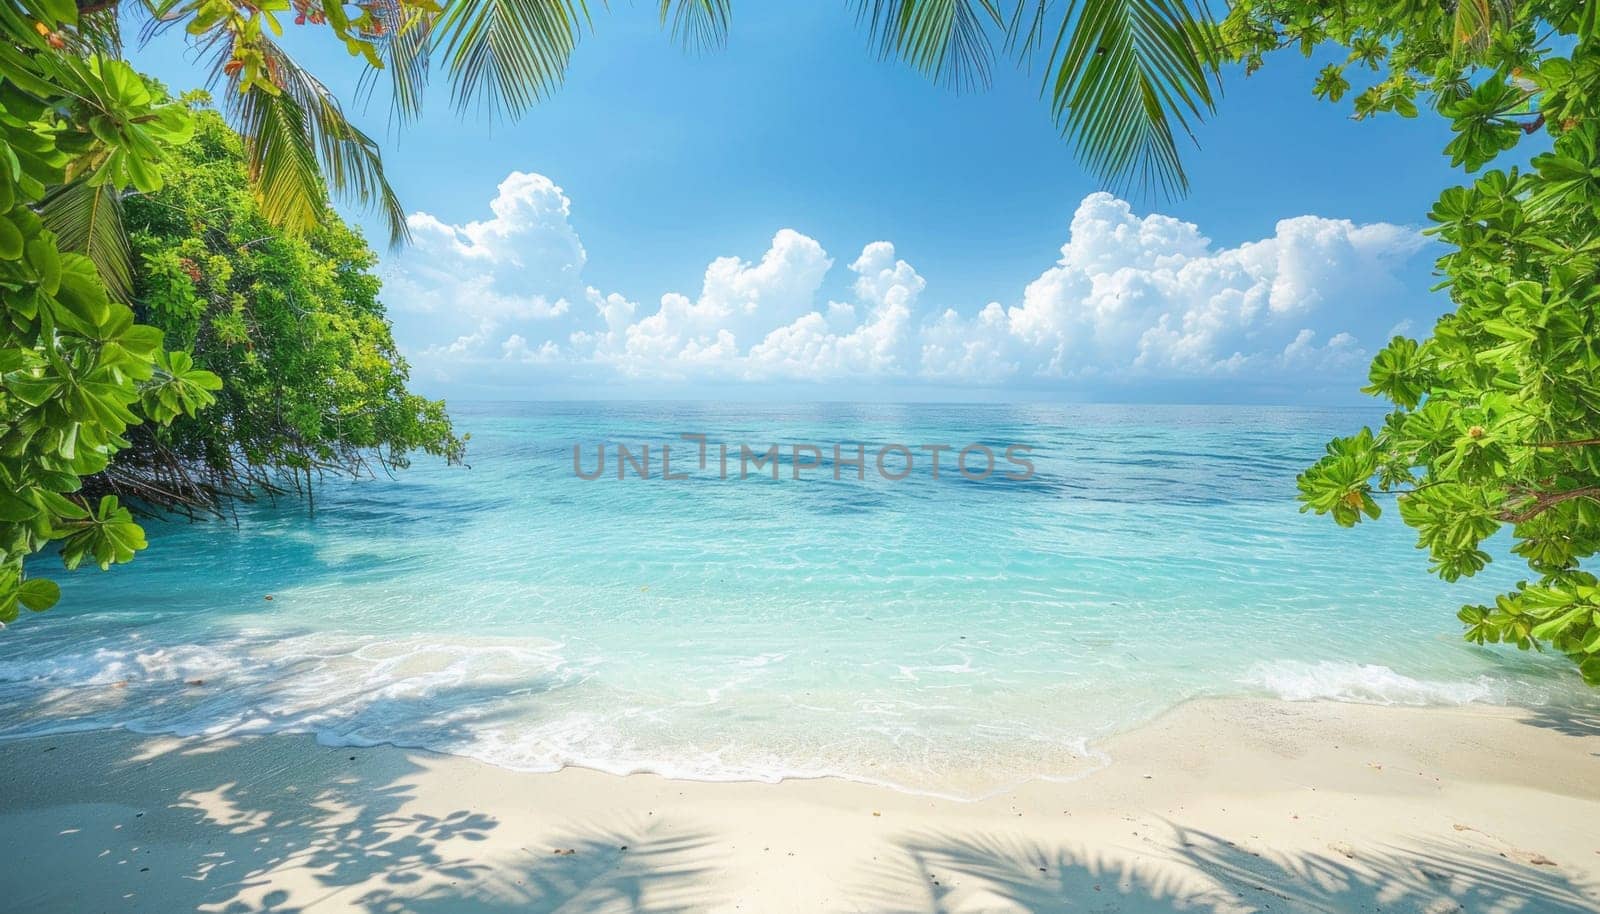 Palm trees and turquoise water create a serene tropical beach setting under a clear sky with fluffy clouds drifting by